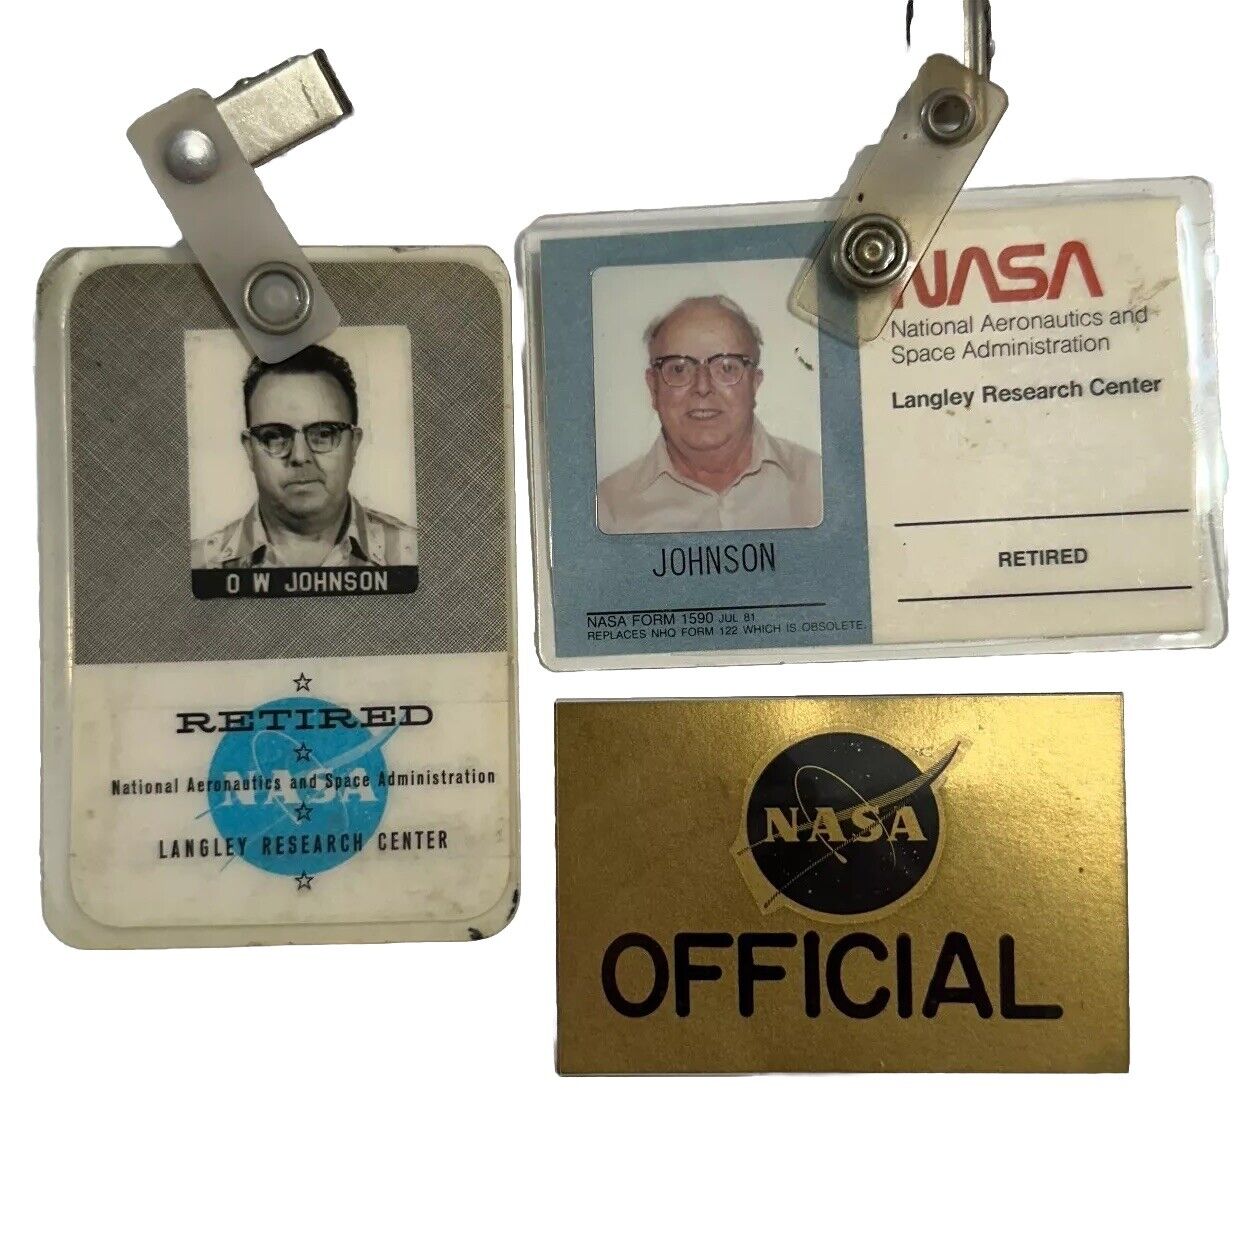 2 Vintage 1968 Obsolete NASA Langley Research Retirement ID Badges + Official